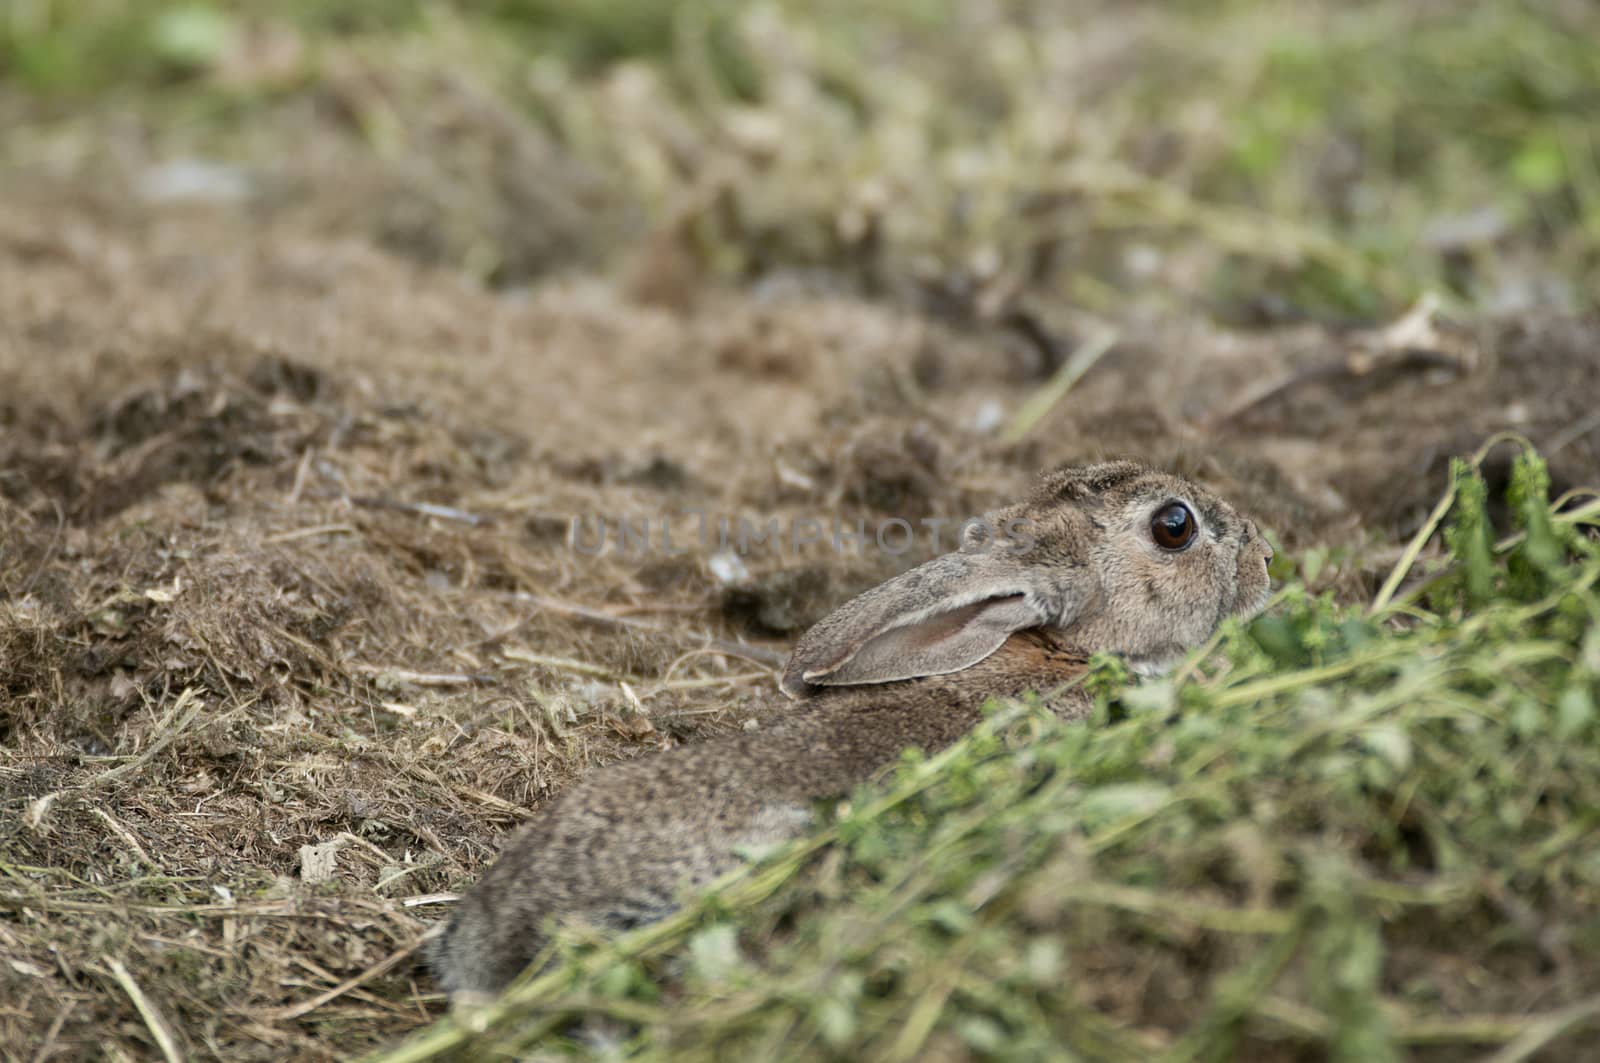 Rabbit portrait in the natural habitat, life in the meadow. Euro by jalonsohu@gmail.com